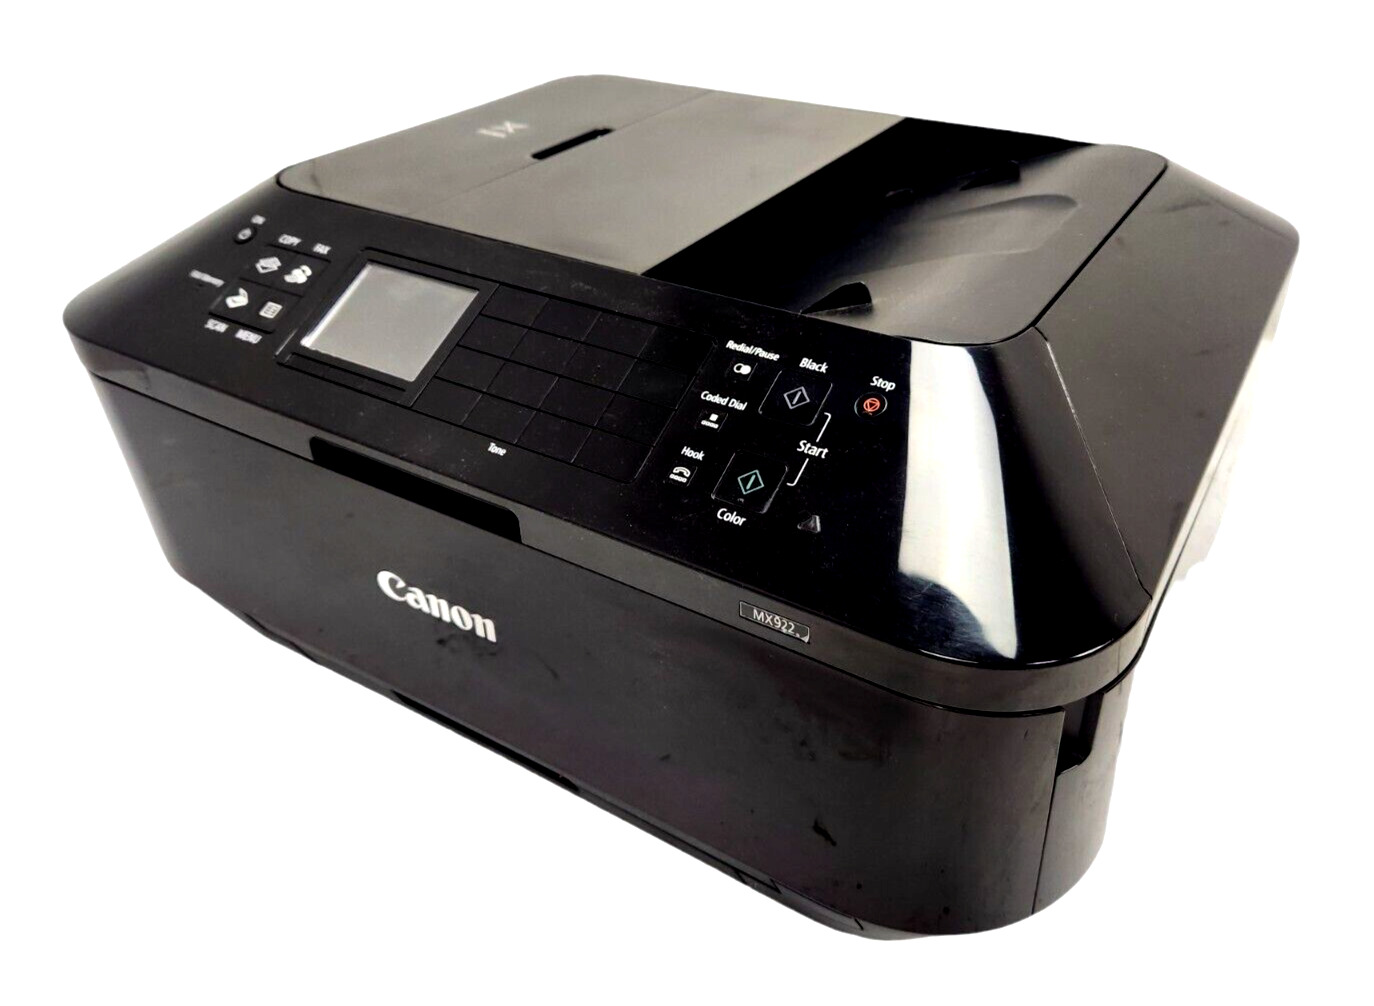 Canon Pixma MX922 Printer All In One Wireless with New Printhead Installed